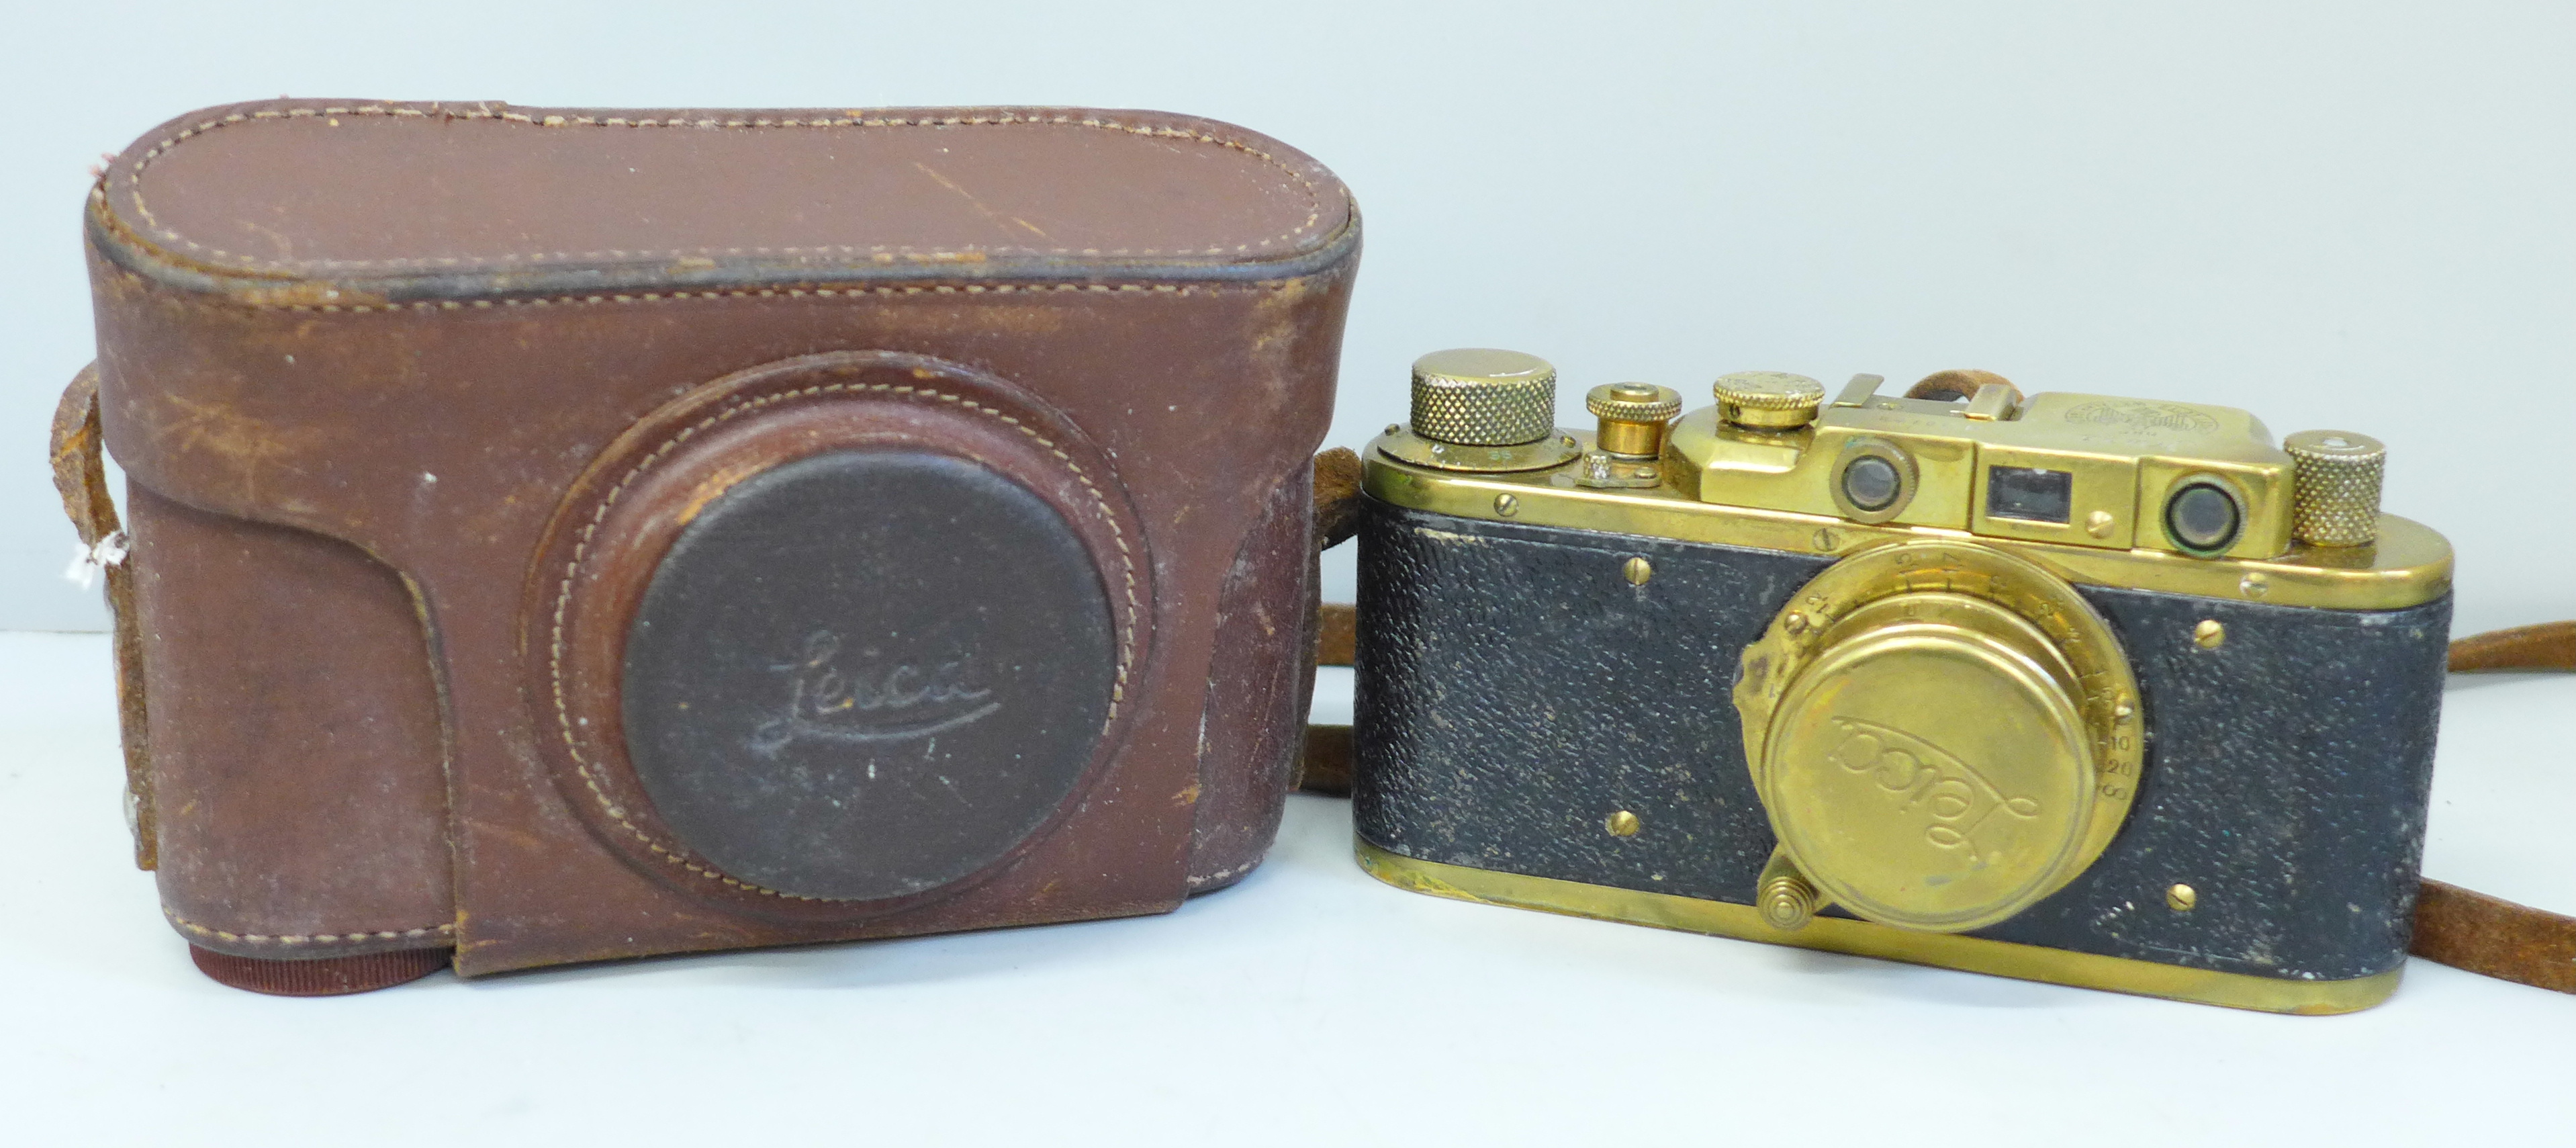 A Leica brass 1923 copy camera and leather case, made in Russia